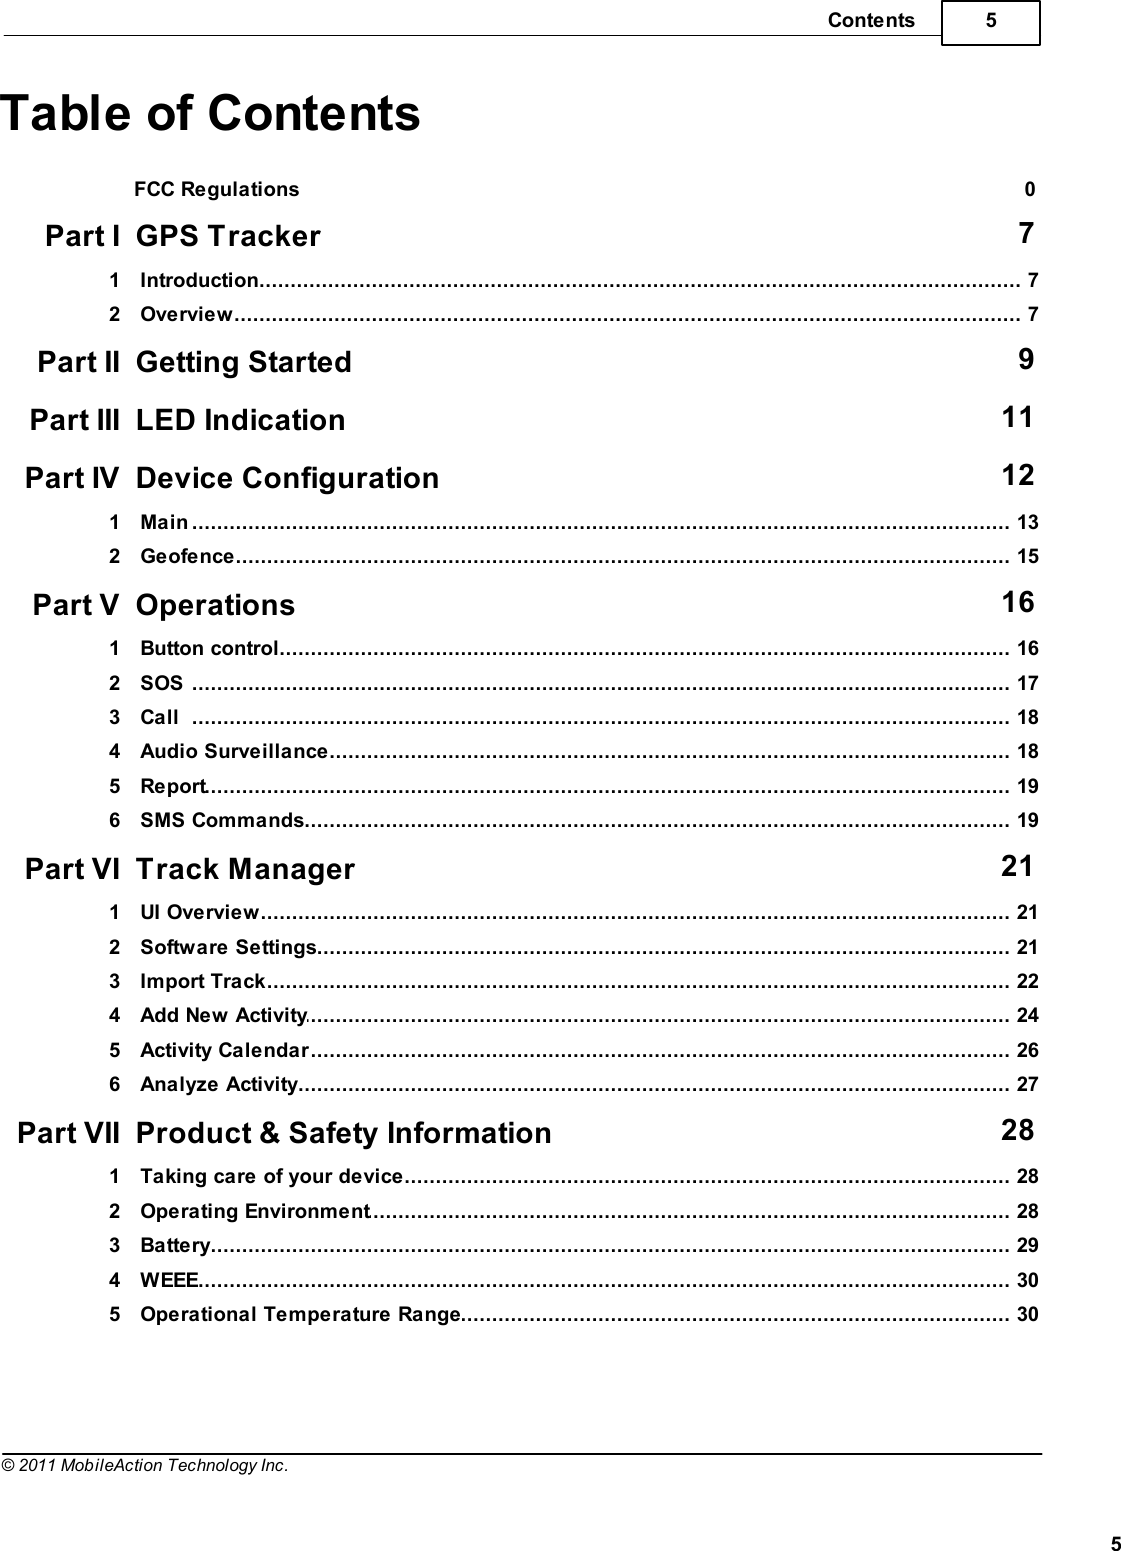 5Contents5© 2011 MobileAction Technology Inc.Table of ContentsFCC Regulations 0Part I GPS Tracker 7................................................................................................................................... 71 Introduction................................................................................................................................... 72 OverviewPart II Getting Started 9Part III LED Indication 11Part IV Device Configuration 12................................................................................................................................... 131 Main................................................................................................................................... 152 GeofencePart V Operations 16................................................................................................................................... 161 Button control................................................................................................................................... 172 SOS................................................................................................................................... 183 Call................................................................................................................................... 184 Audio Surveillance................................................................................................................................... 195 Report................................................................................................................................... 196 SMS CommandsPart VI Track Manager 21................................................................................................................................... 211 UI Overview................................................................................................................................... 212 Software Settings................................................................................................................................... 223 Import Track................................................................................................................................... 244 Add New Activity................................................................................................................................... 265 Activity Calendar................................................................................................................................... 276 Analyze ActivityPart VII Product &amp; Safety Information 28................................................................................................................................... 281 Taking care of your device................................................................................................................................... 282 Operating Environment................................................................................................................................... 293 Battery................................................................................................................................... 304 WEEE................................................................................................................................... 305 Operational Temperature Range